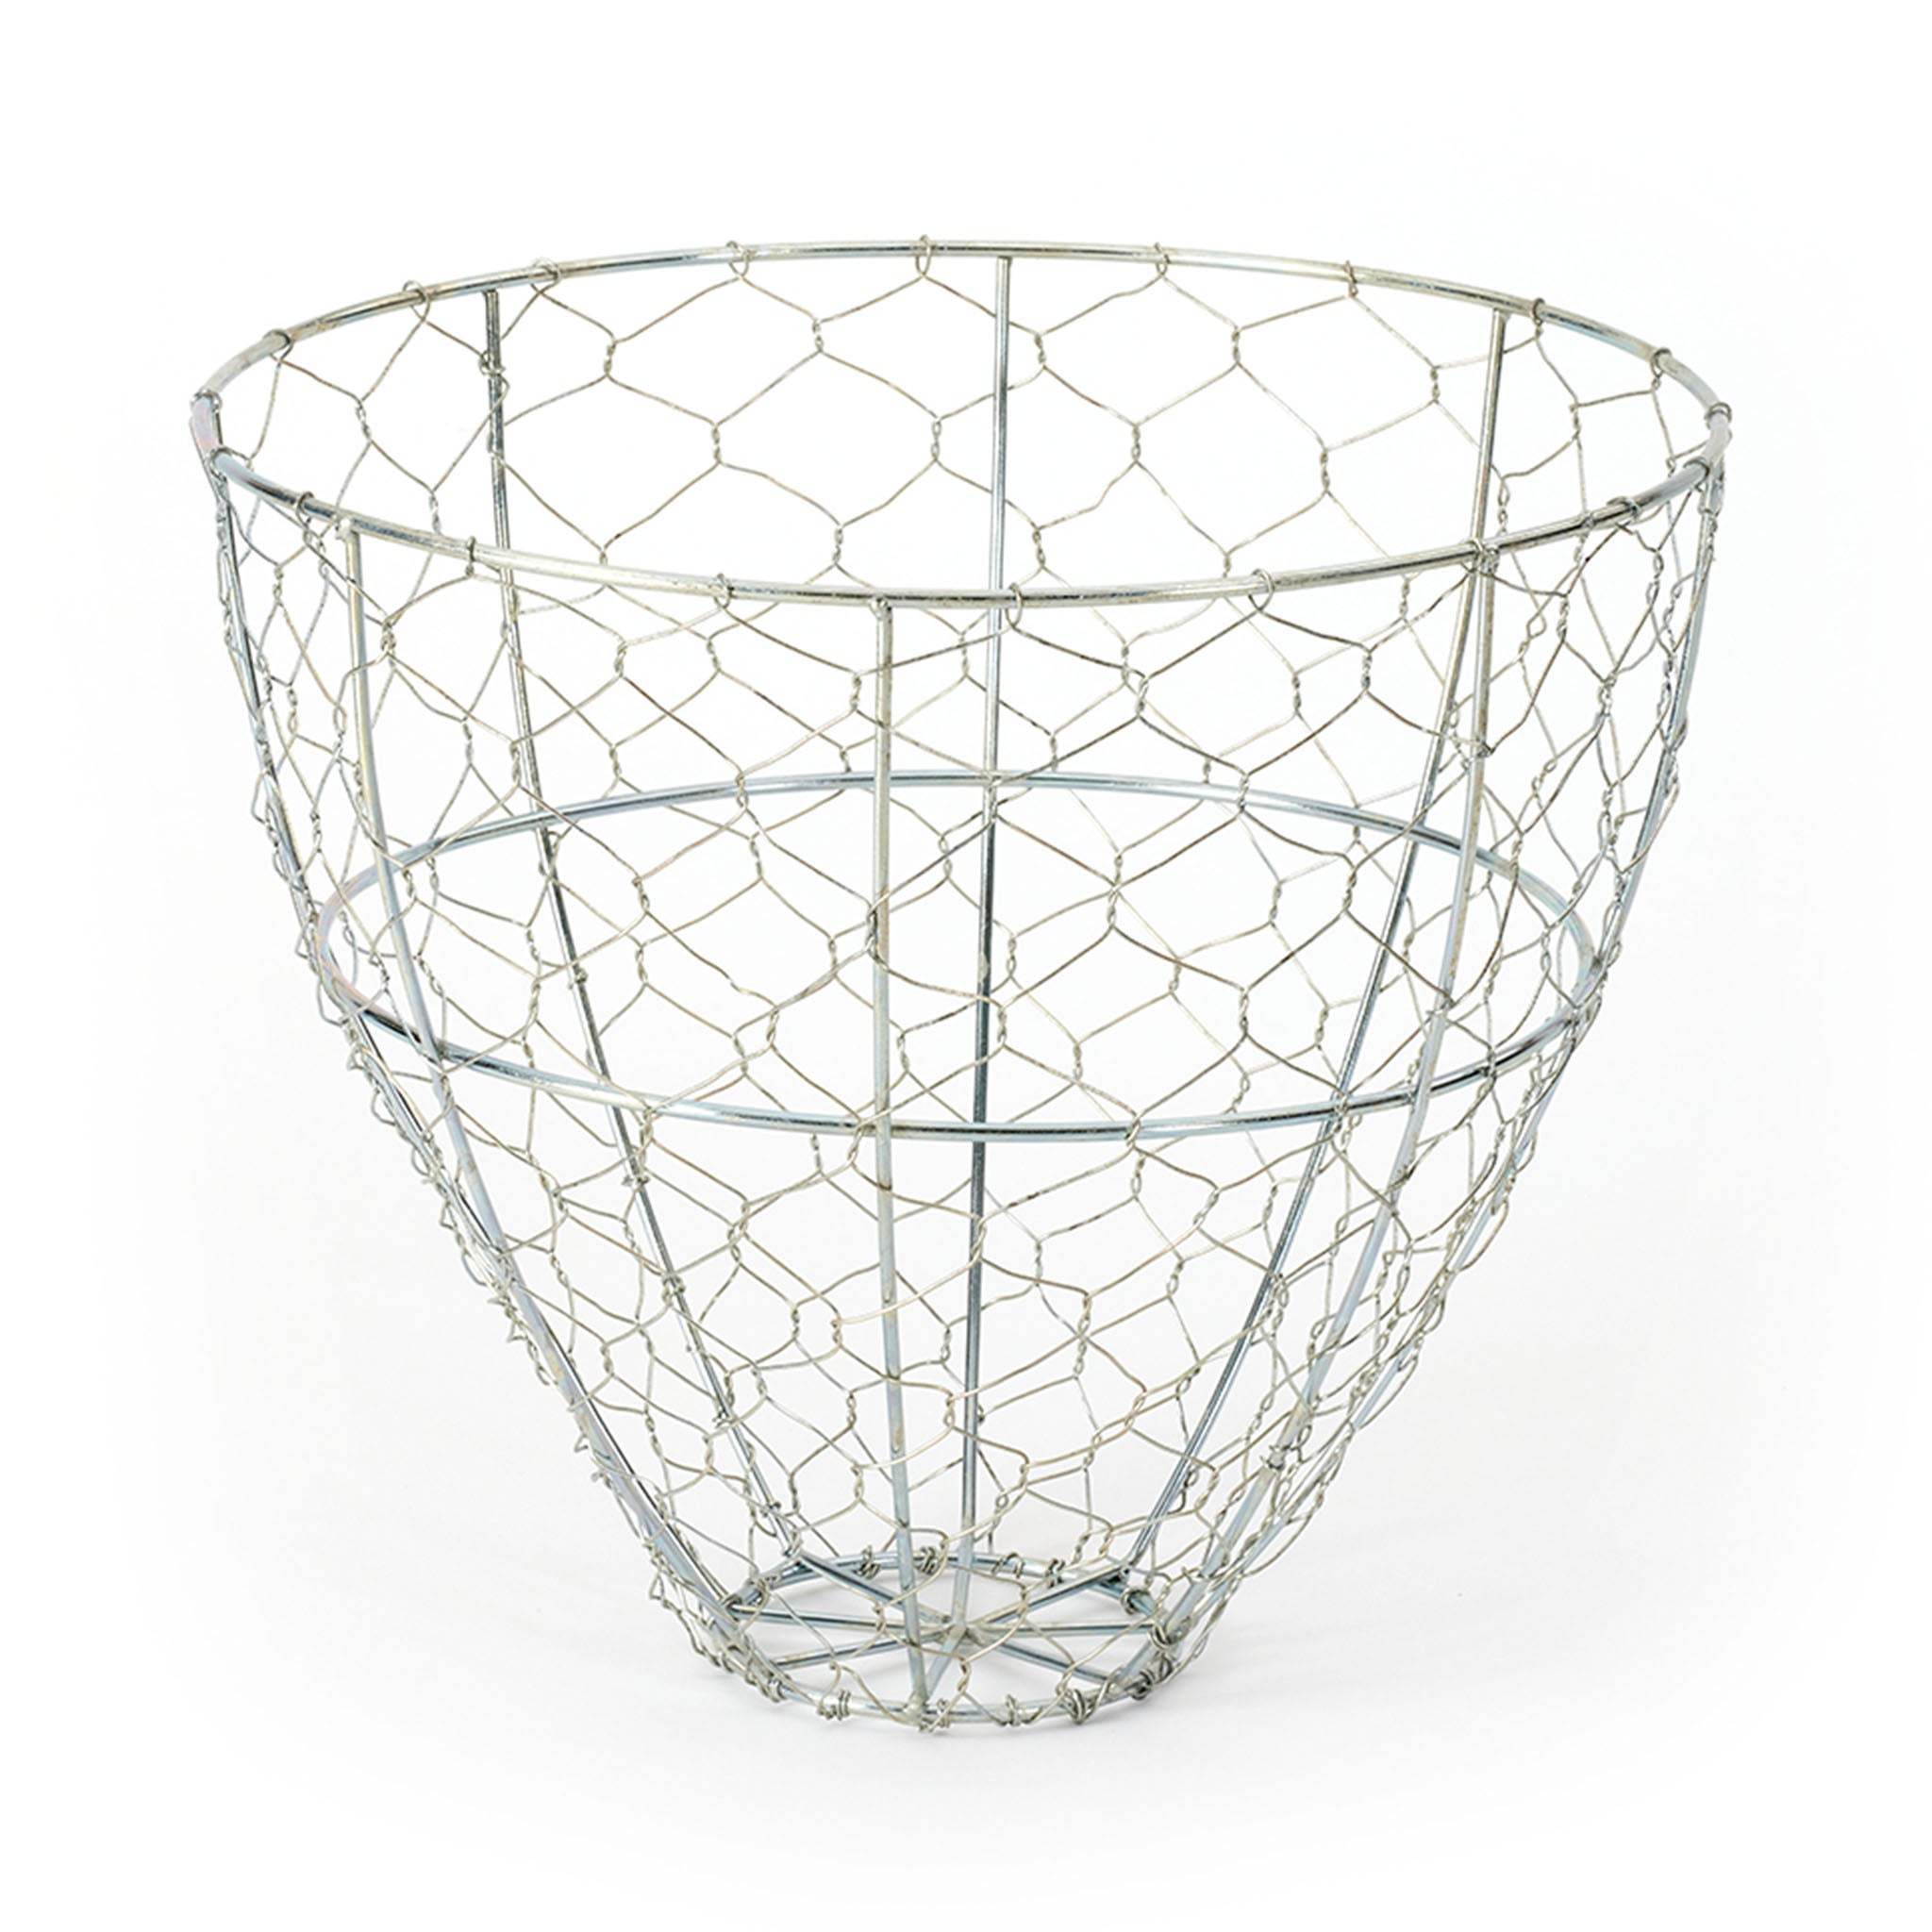 Crab Traps and Dip Nets - KB White